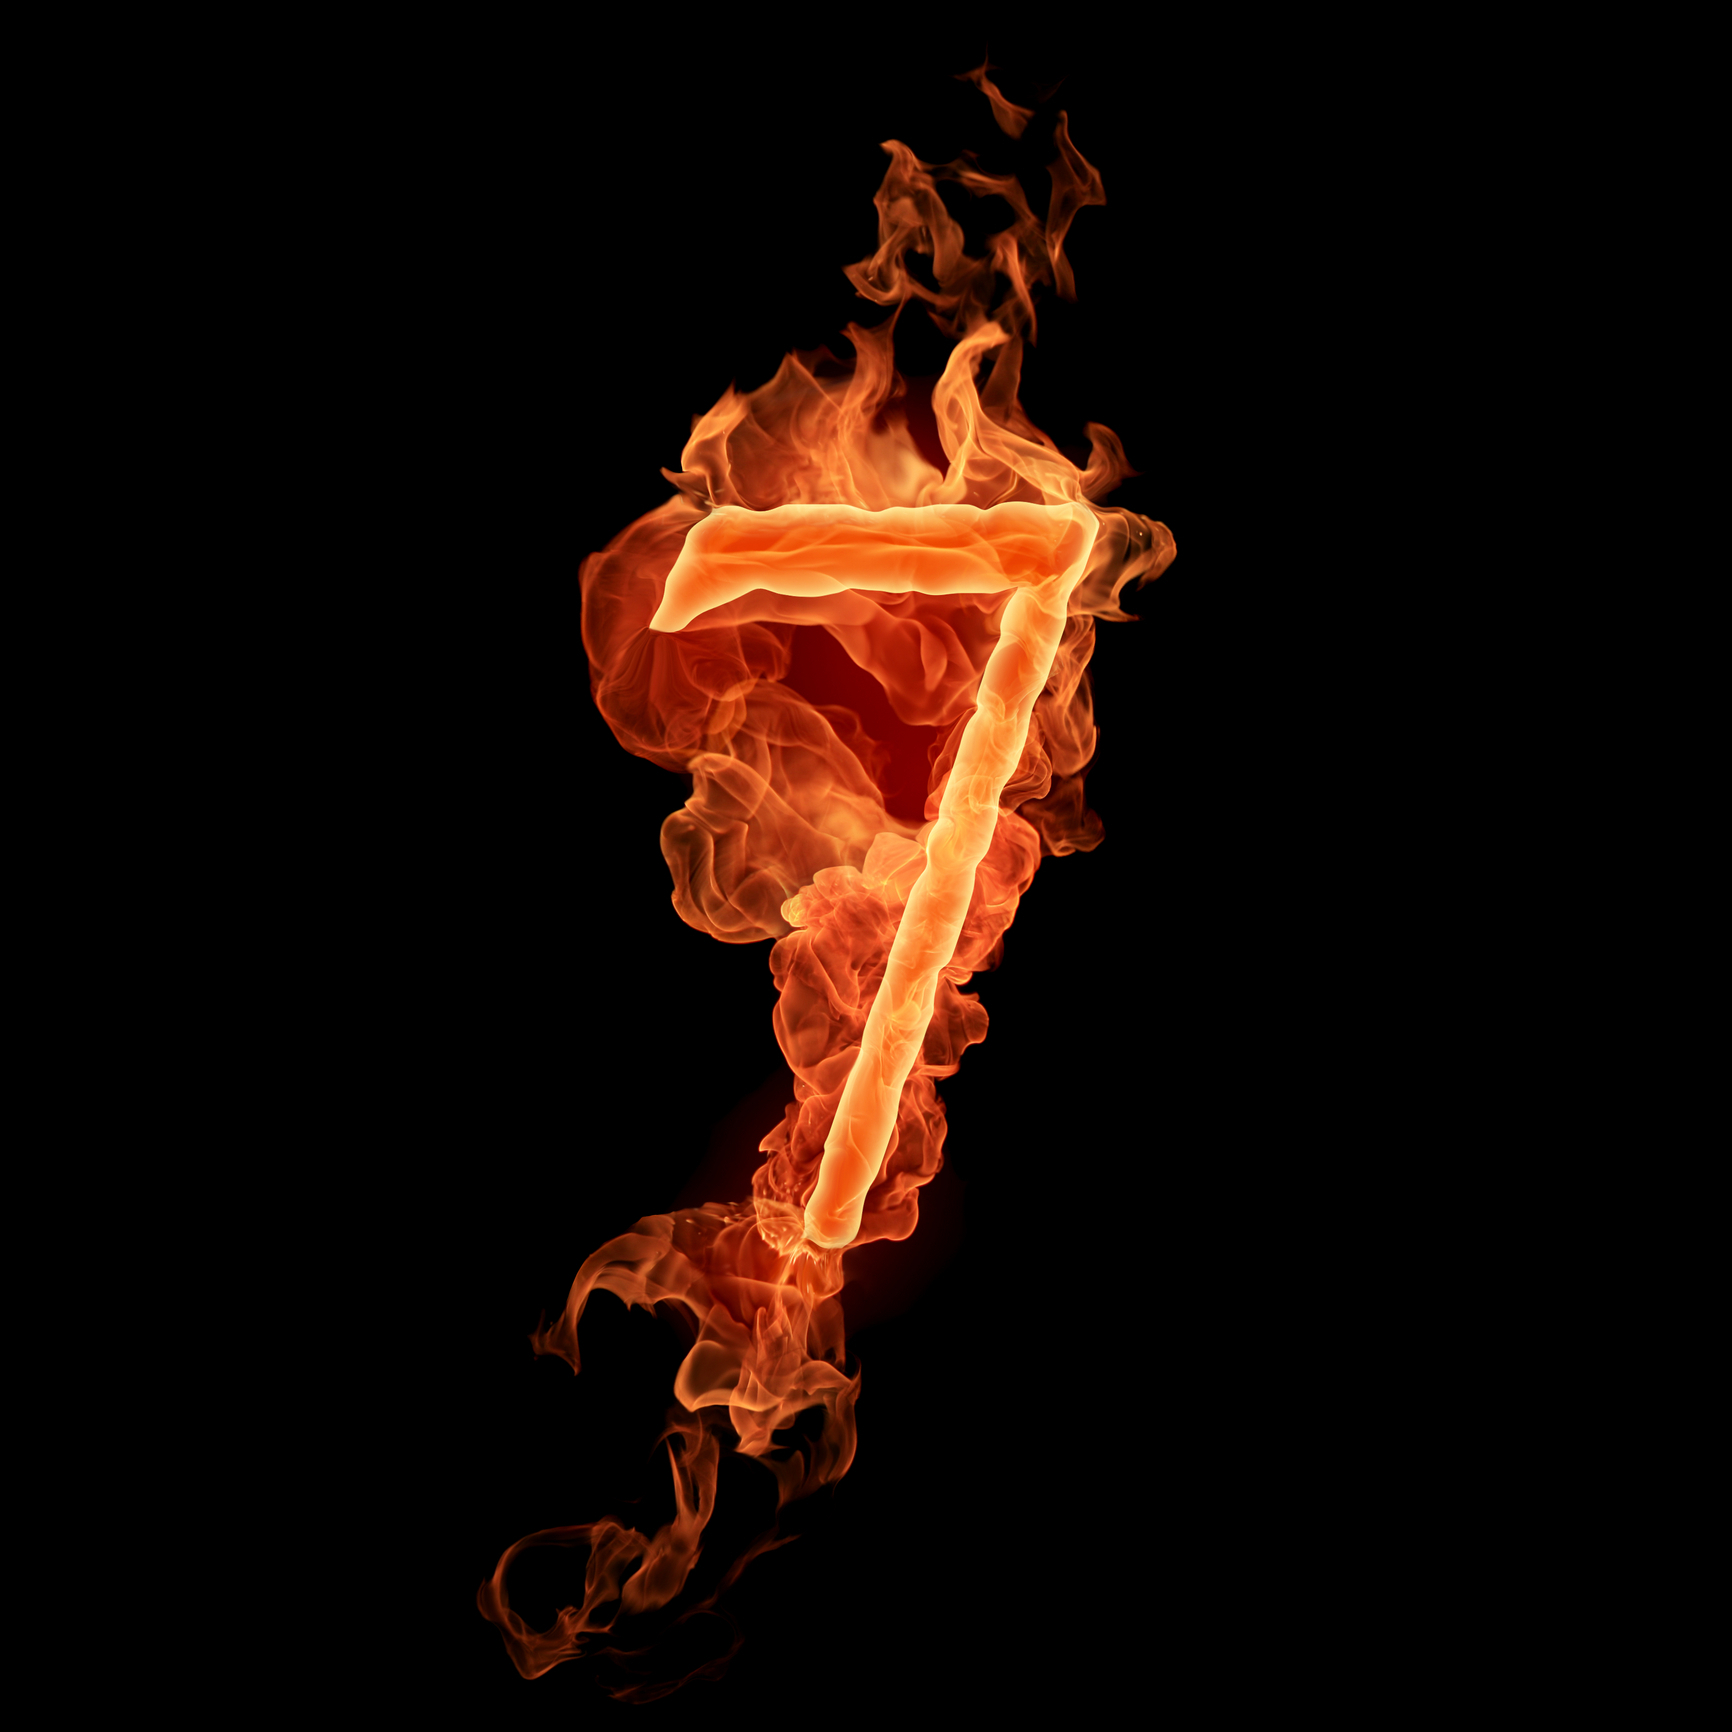 The Number - Flaming Number 7 - HD Wallpaper 